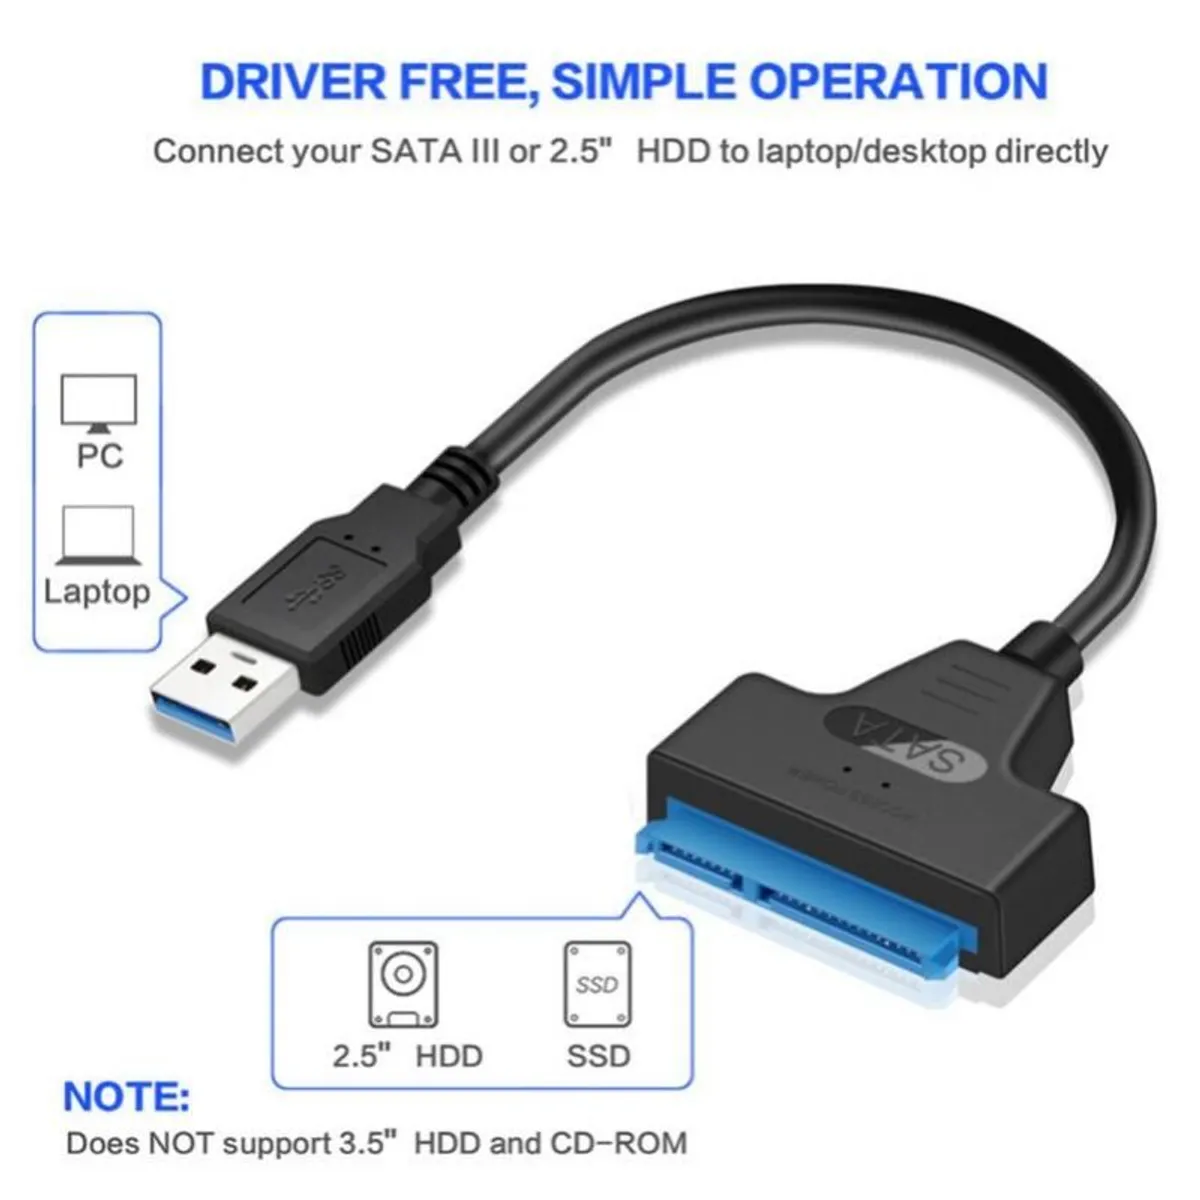 USB SATA 3 Cable Sata To USB3.0 Adapter UP To 6 Gbps For 2.5" HDD/SSD Hard Drive To SATA Converter Cable Connector